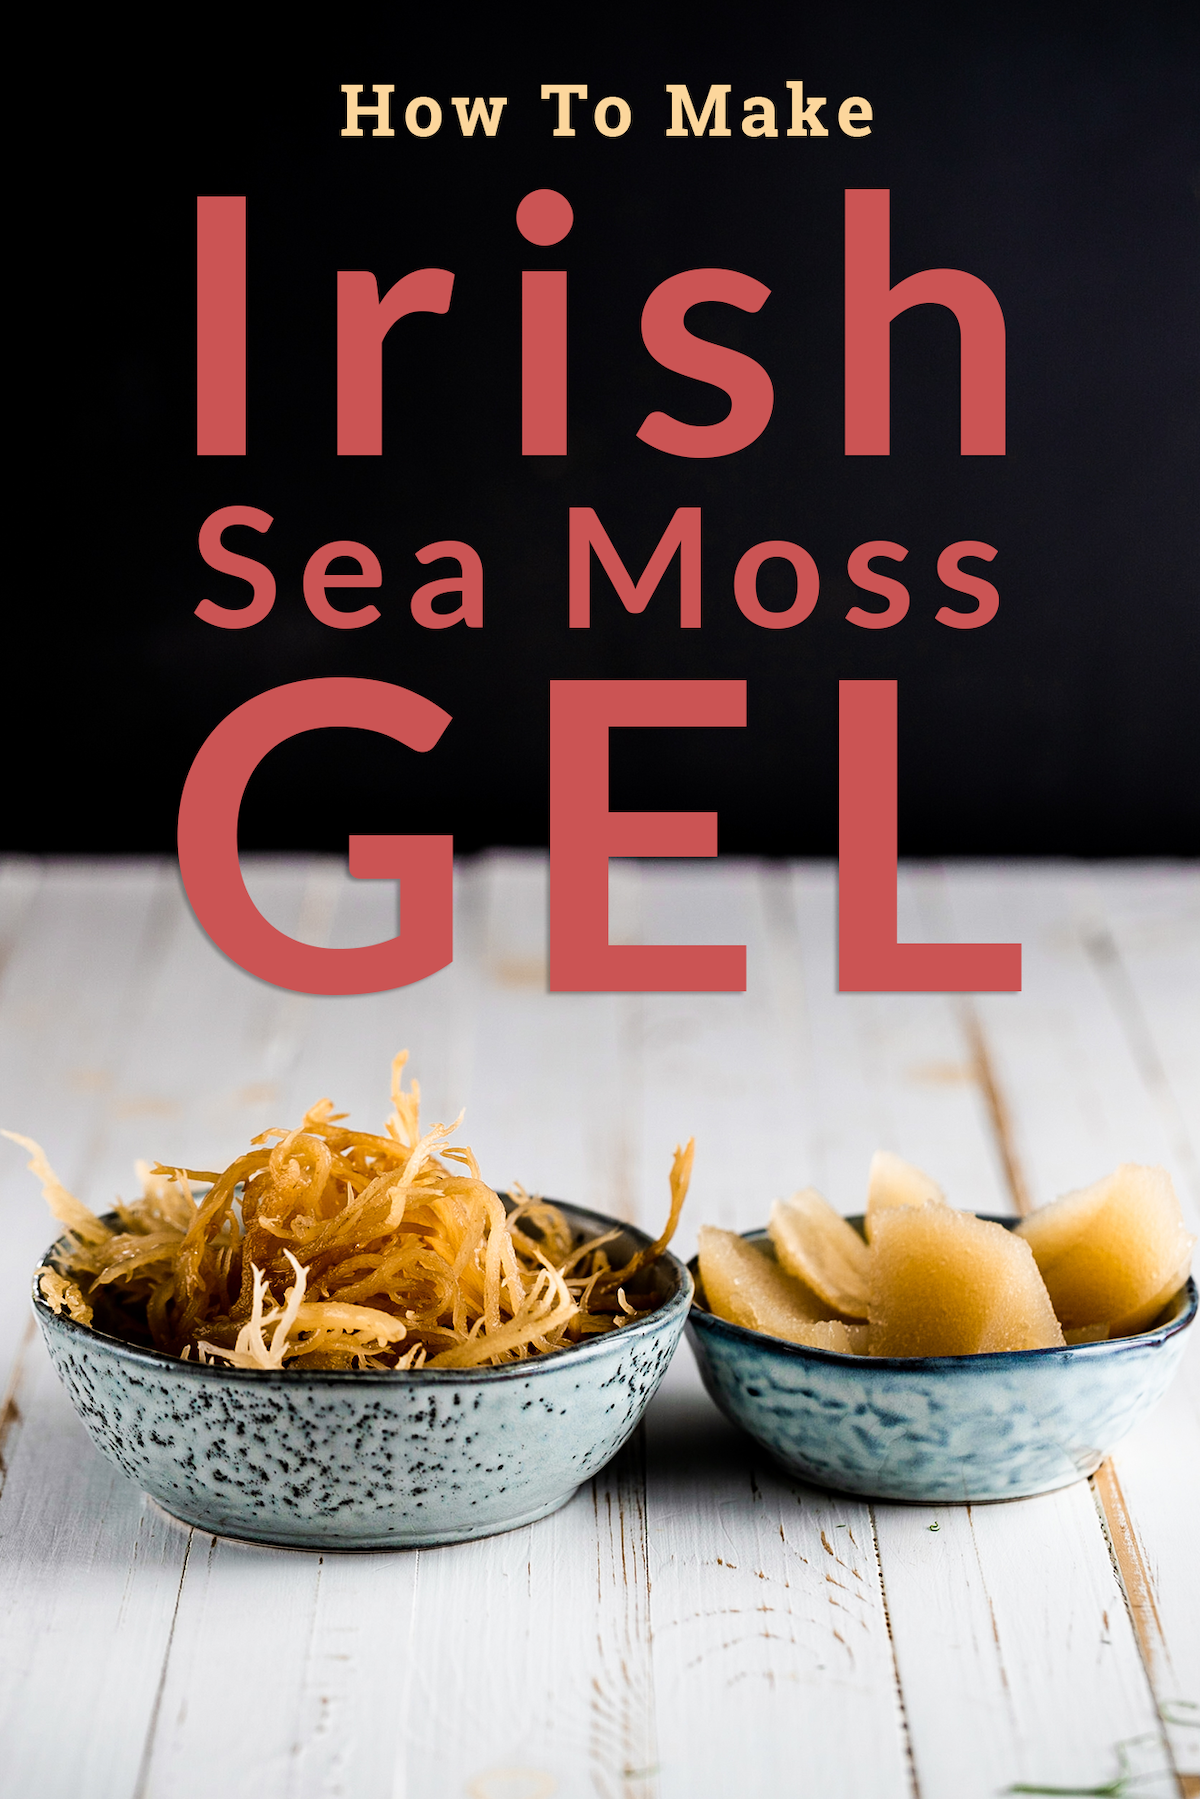 Irish moss and Irish moss gel in blue dishes on a white background with text above